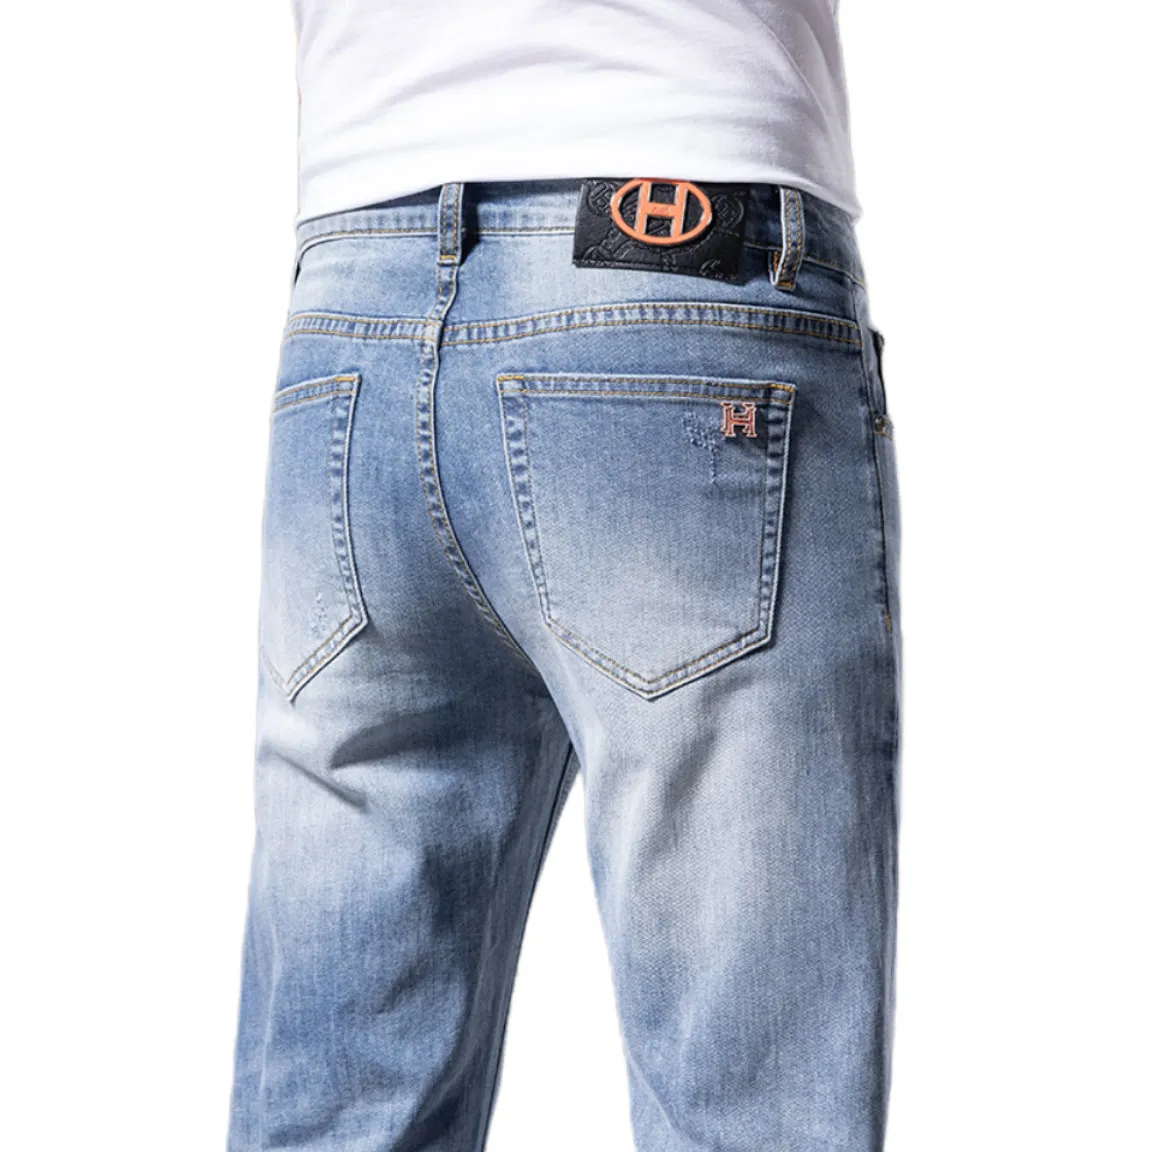 Men's Jeans Spring Summer Thin Slim Fit European American High-end Brand Small Straight Double F Pants Q9545-2